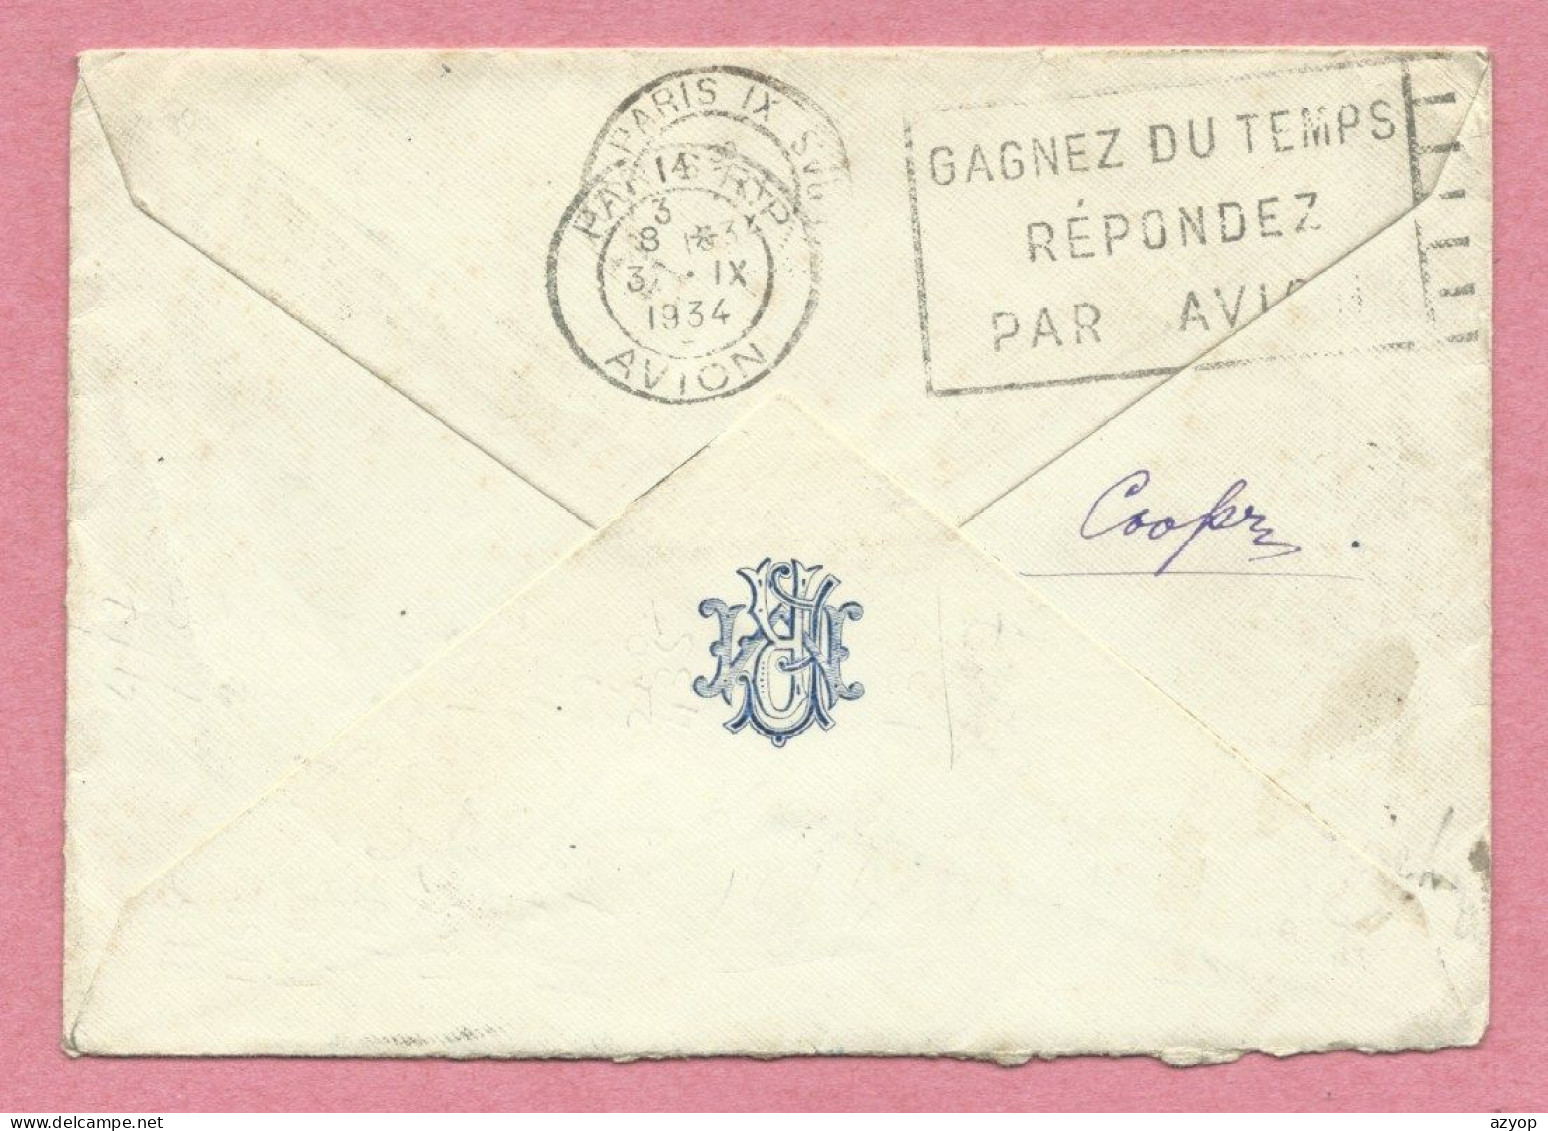 India - Indes - Letter With Indian Stamps - AIR MAIL - From BOMBAY To PARIS - 1934 - 2 Scans - Corréo Aéreo